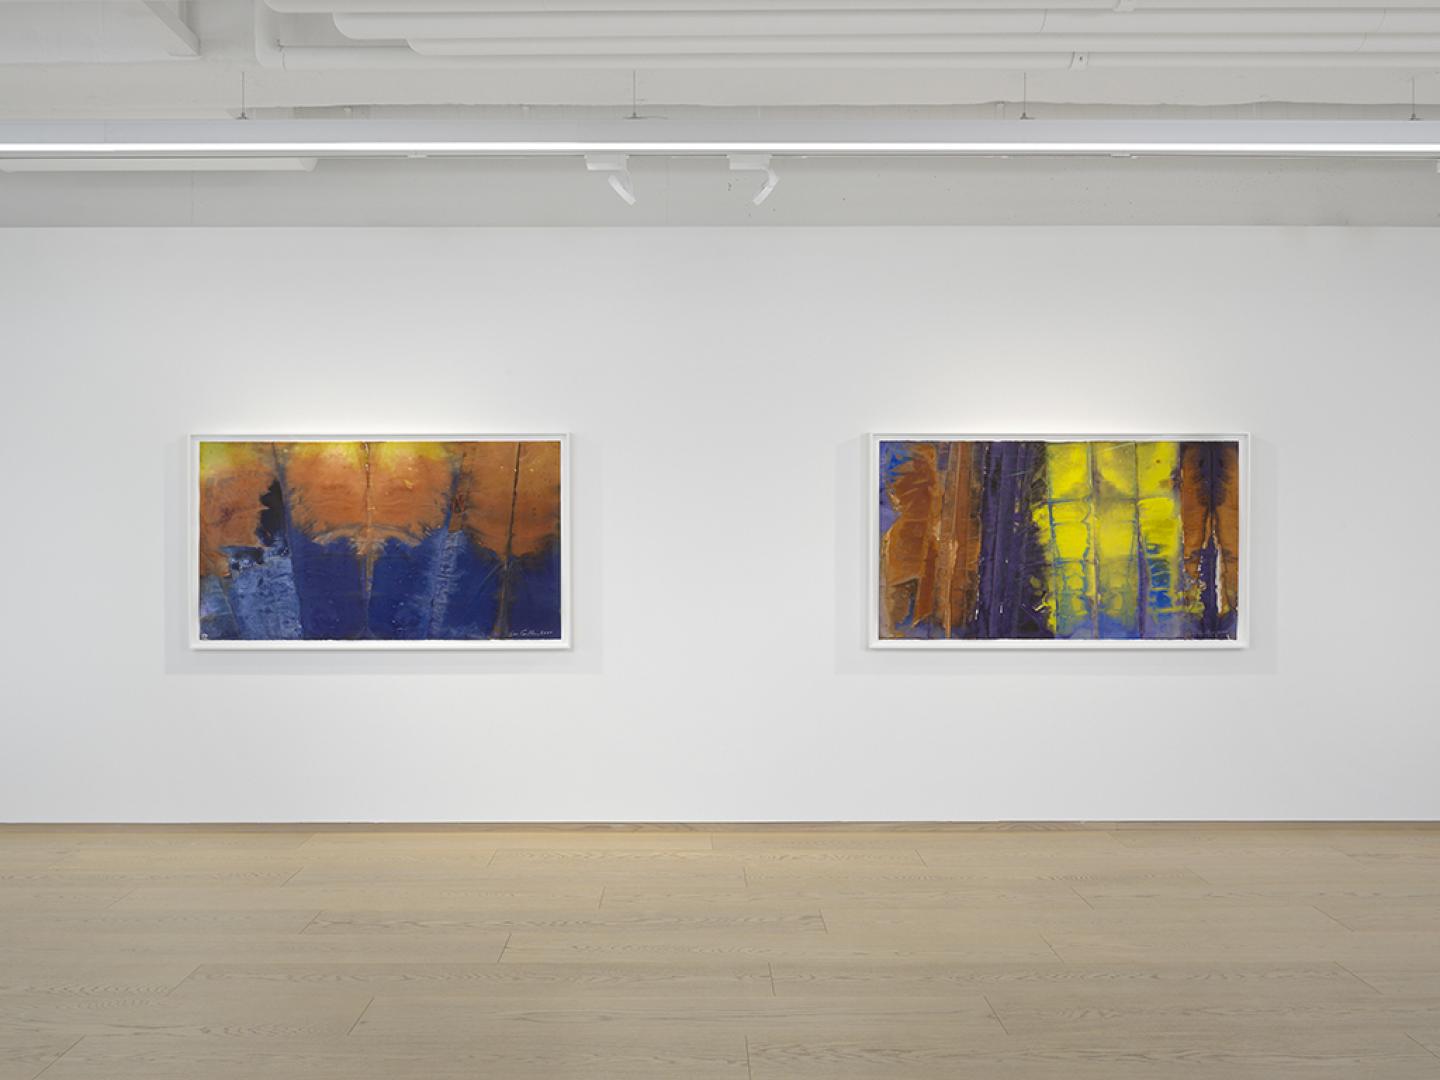 Installation view, Sam Gilliam: Watercolors, January 21 – March 19, 2021, Pace Gallery, Geneva © Sam Gilliam / 2020 Artists Rights Society Photo: Annik Wetter, courtesy Pace Gallery